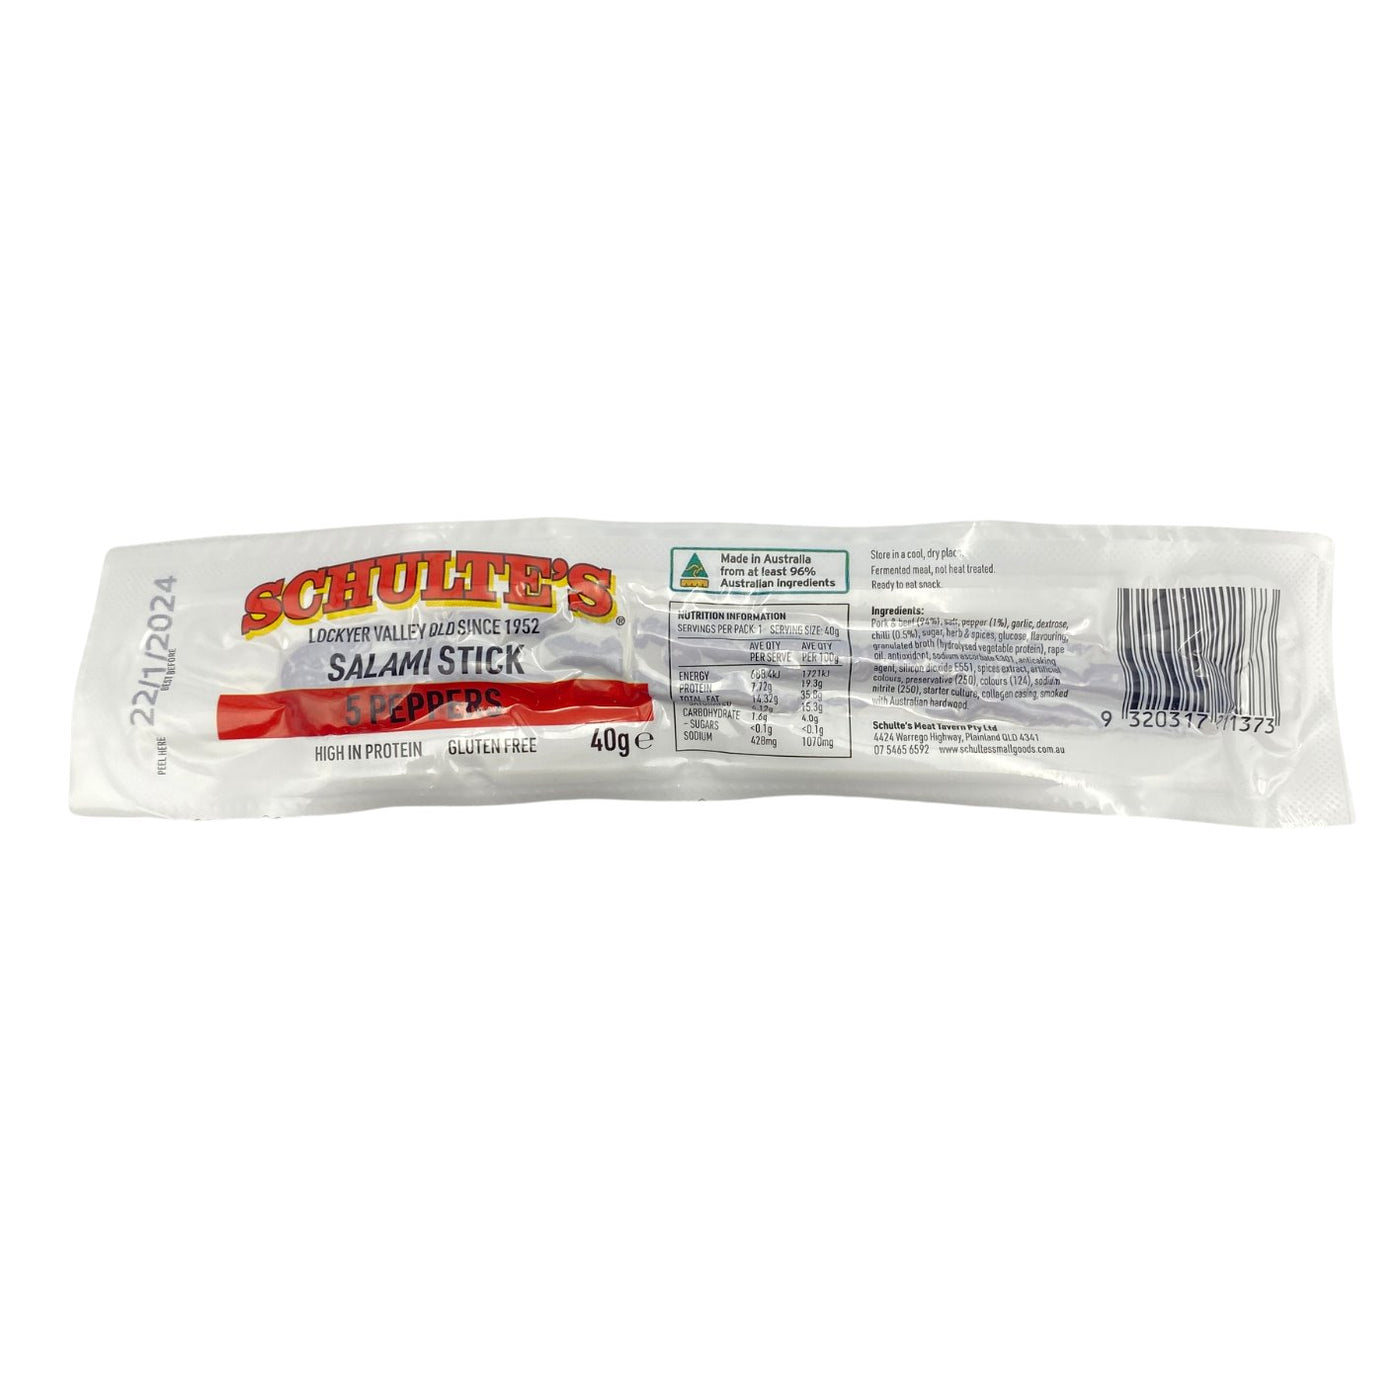 Schulte's 5 Peppers Salami Stick 40g